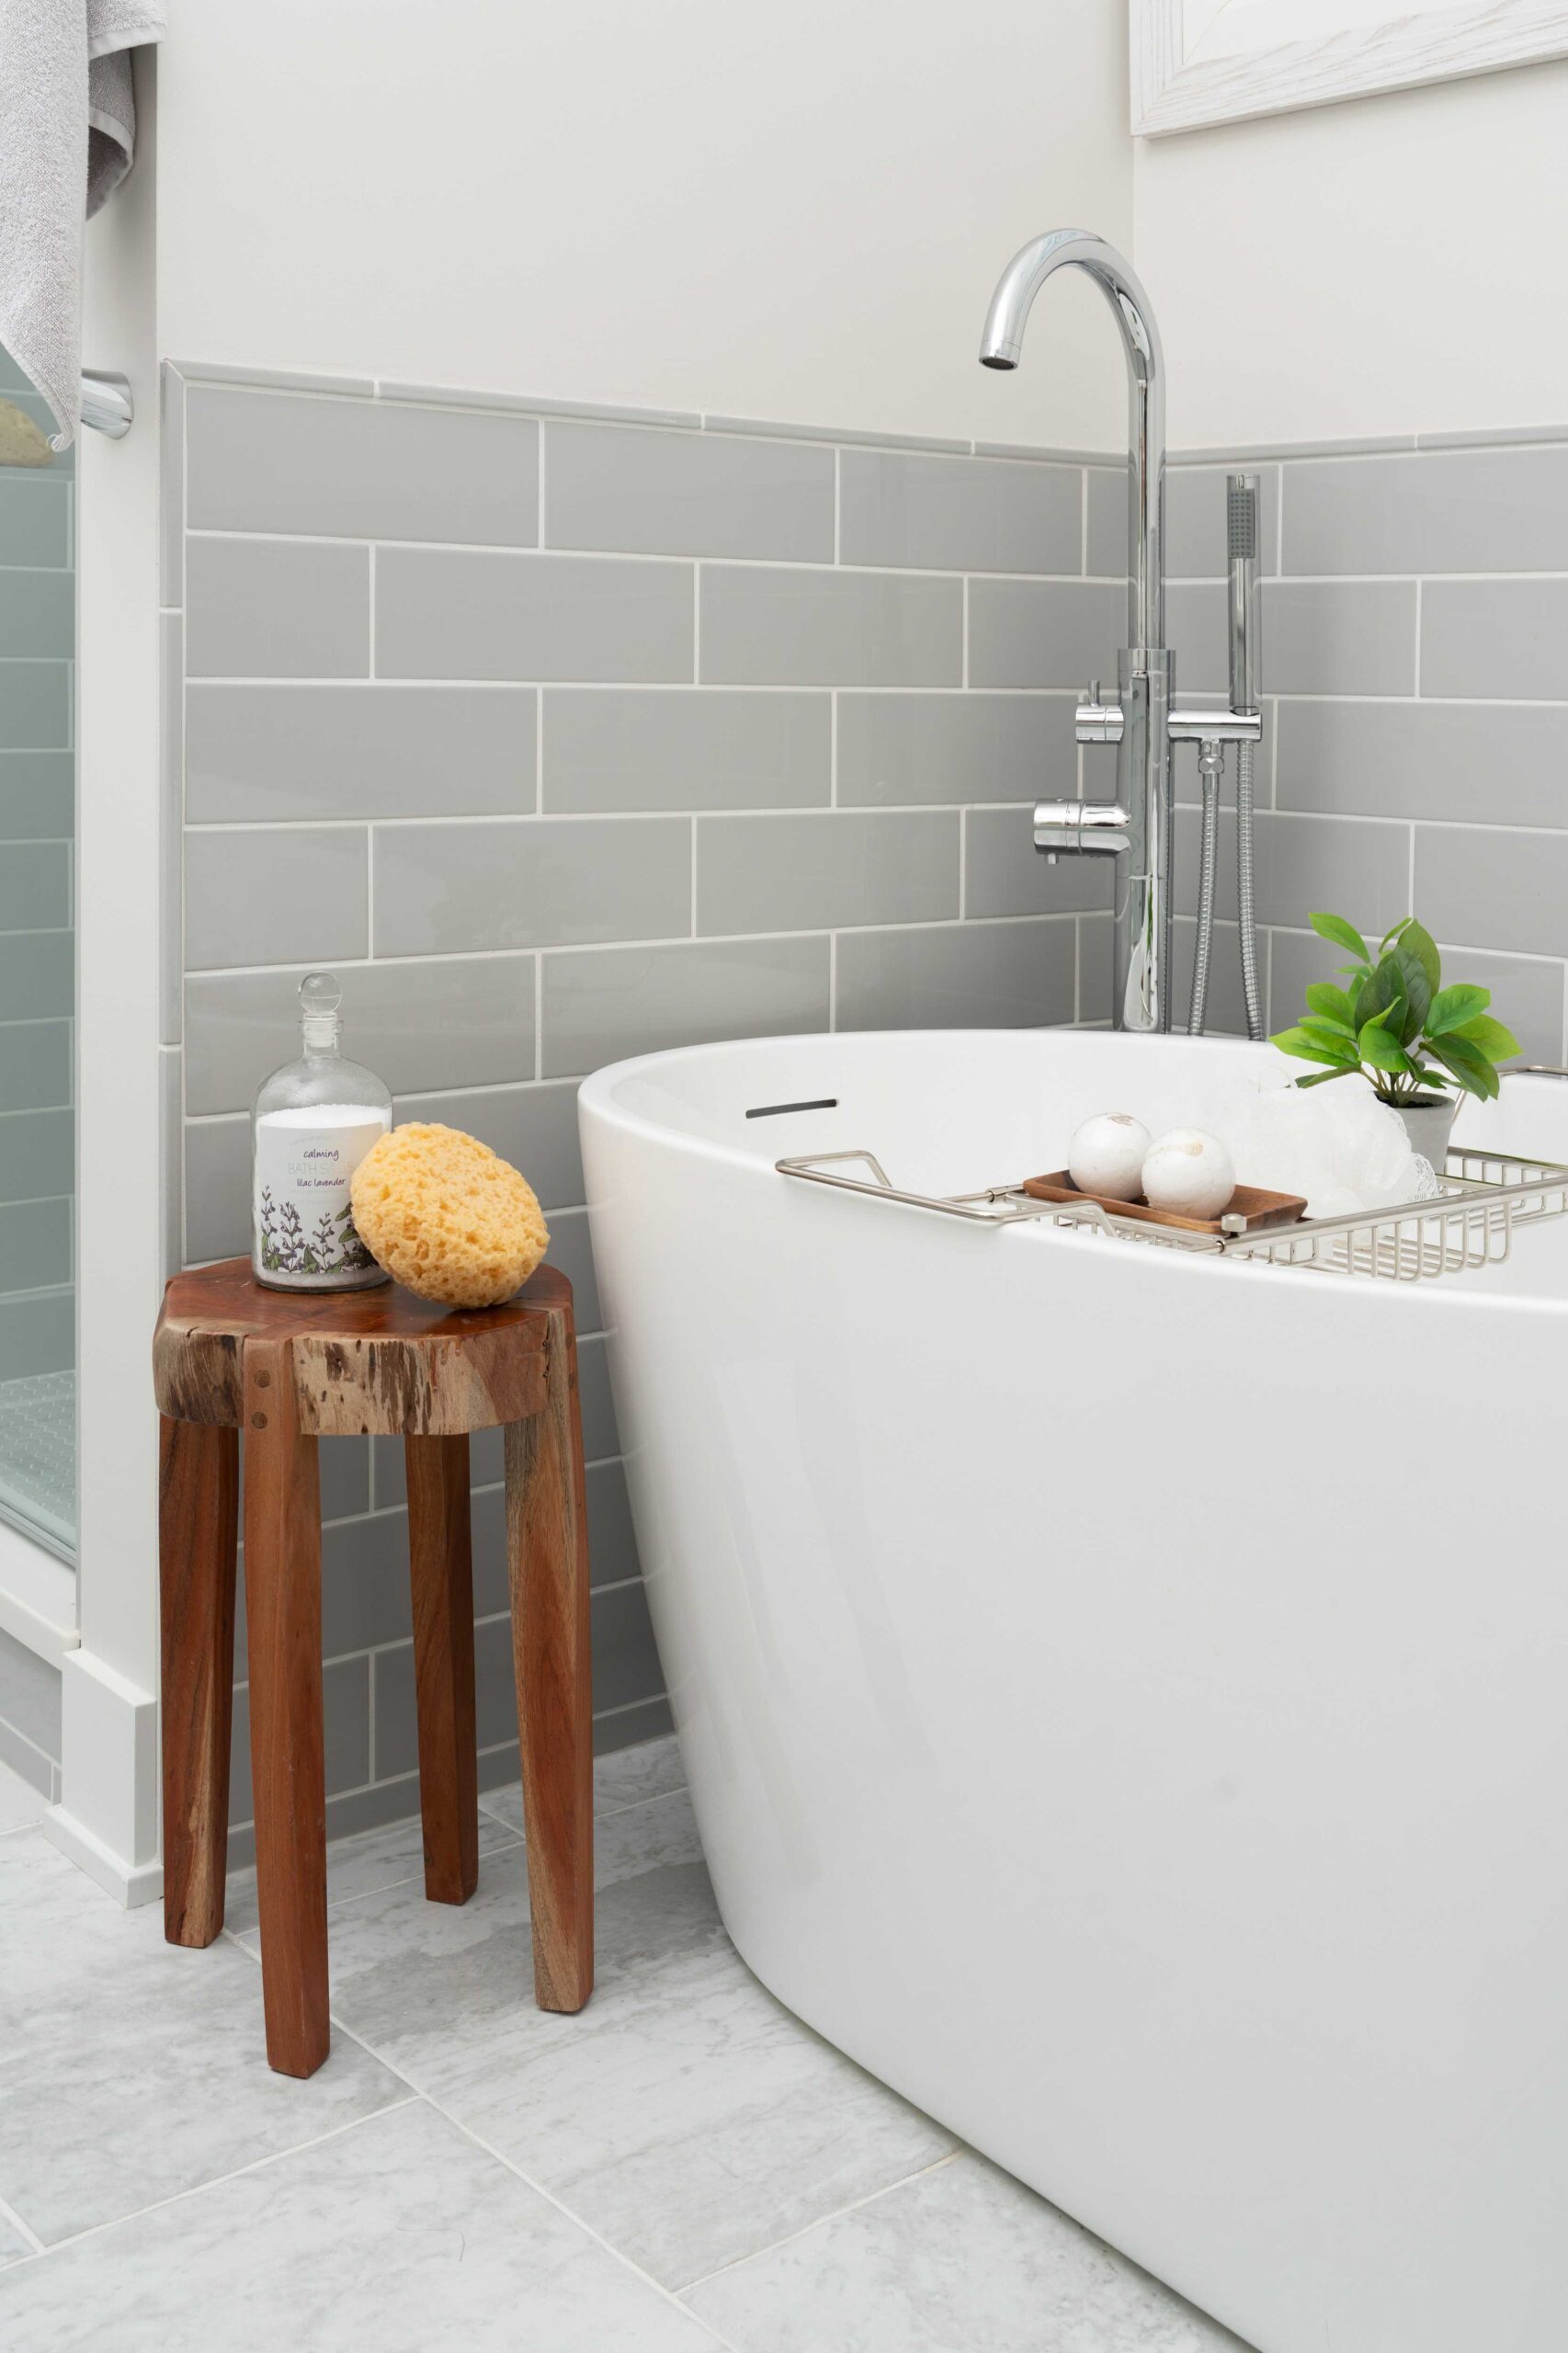 A bathroom with a white tub and wooden stool in the Orchard Lake Remodel.